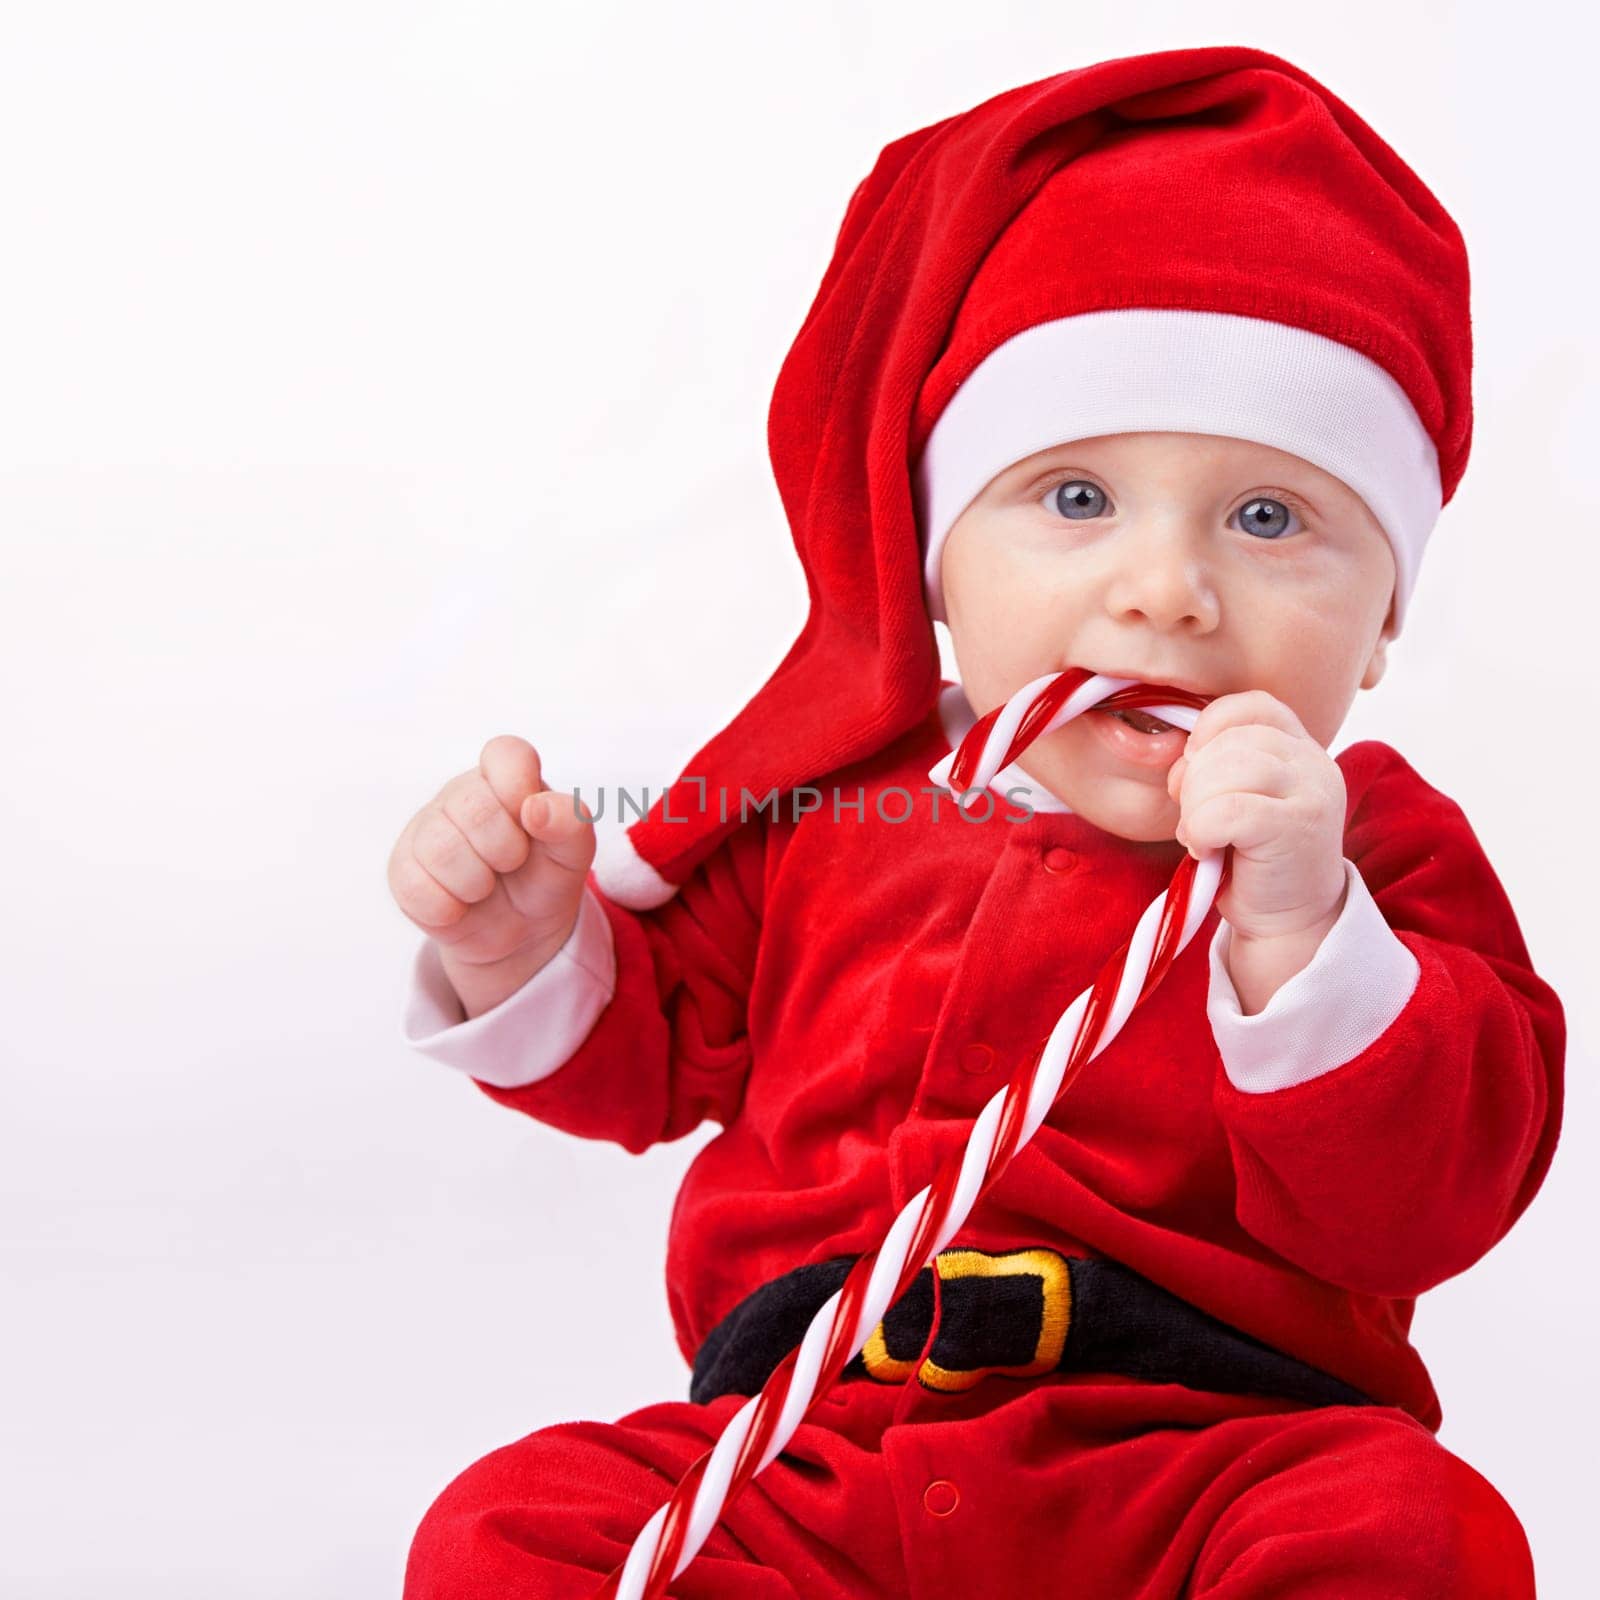 Baby, portrait and studio with santa costume for first Christmas holiday, candy cane and white background. Boy toddler, xmas and outfit for festive season or celebration, innocent and adorable in hat.